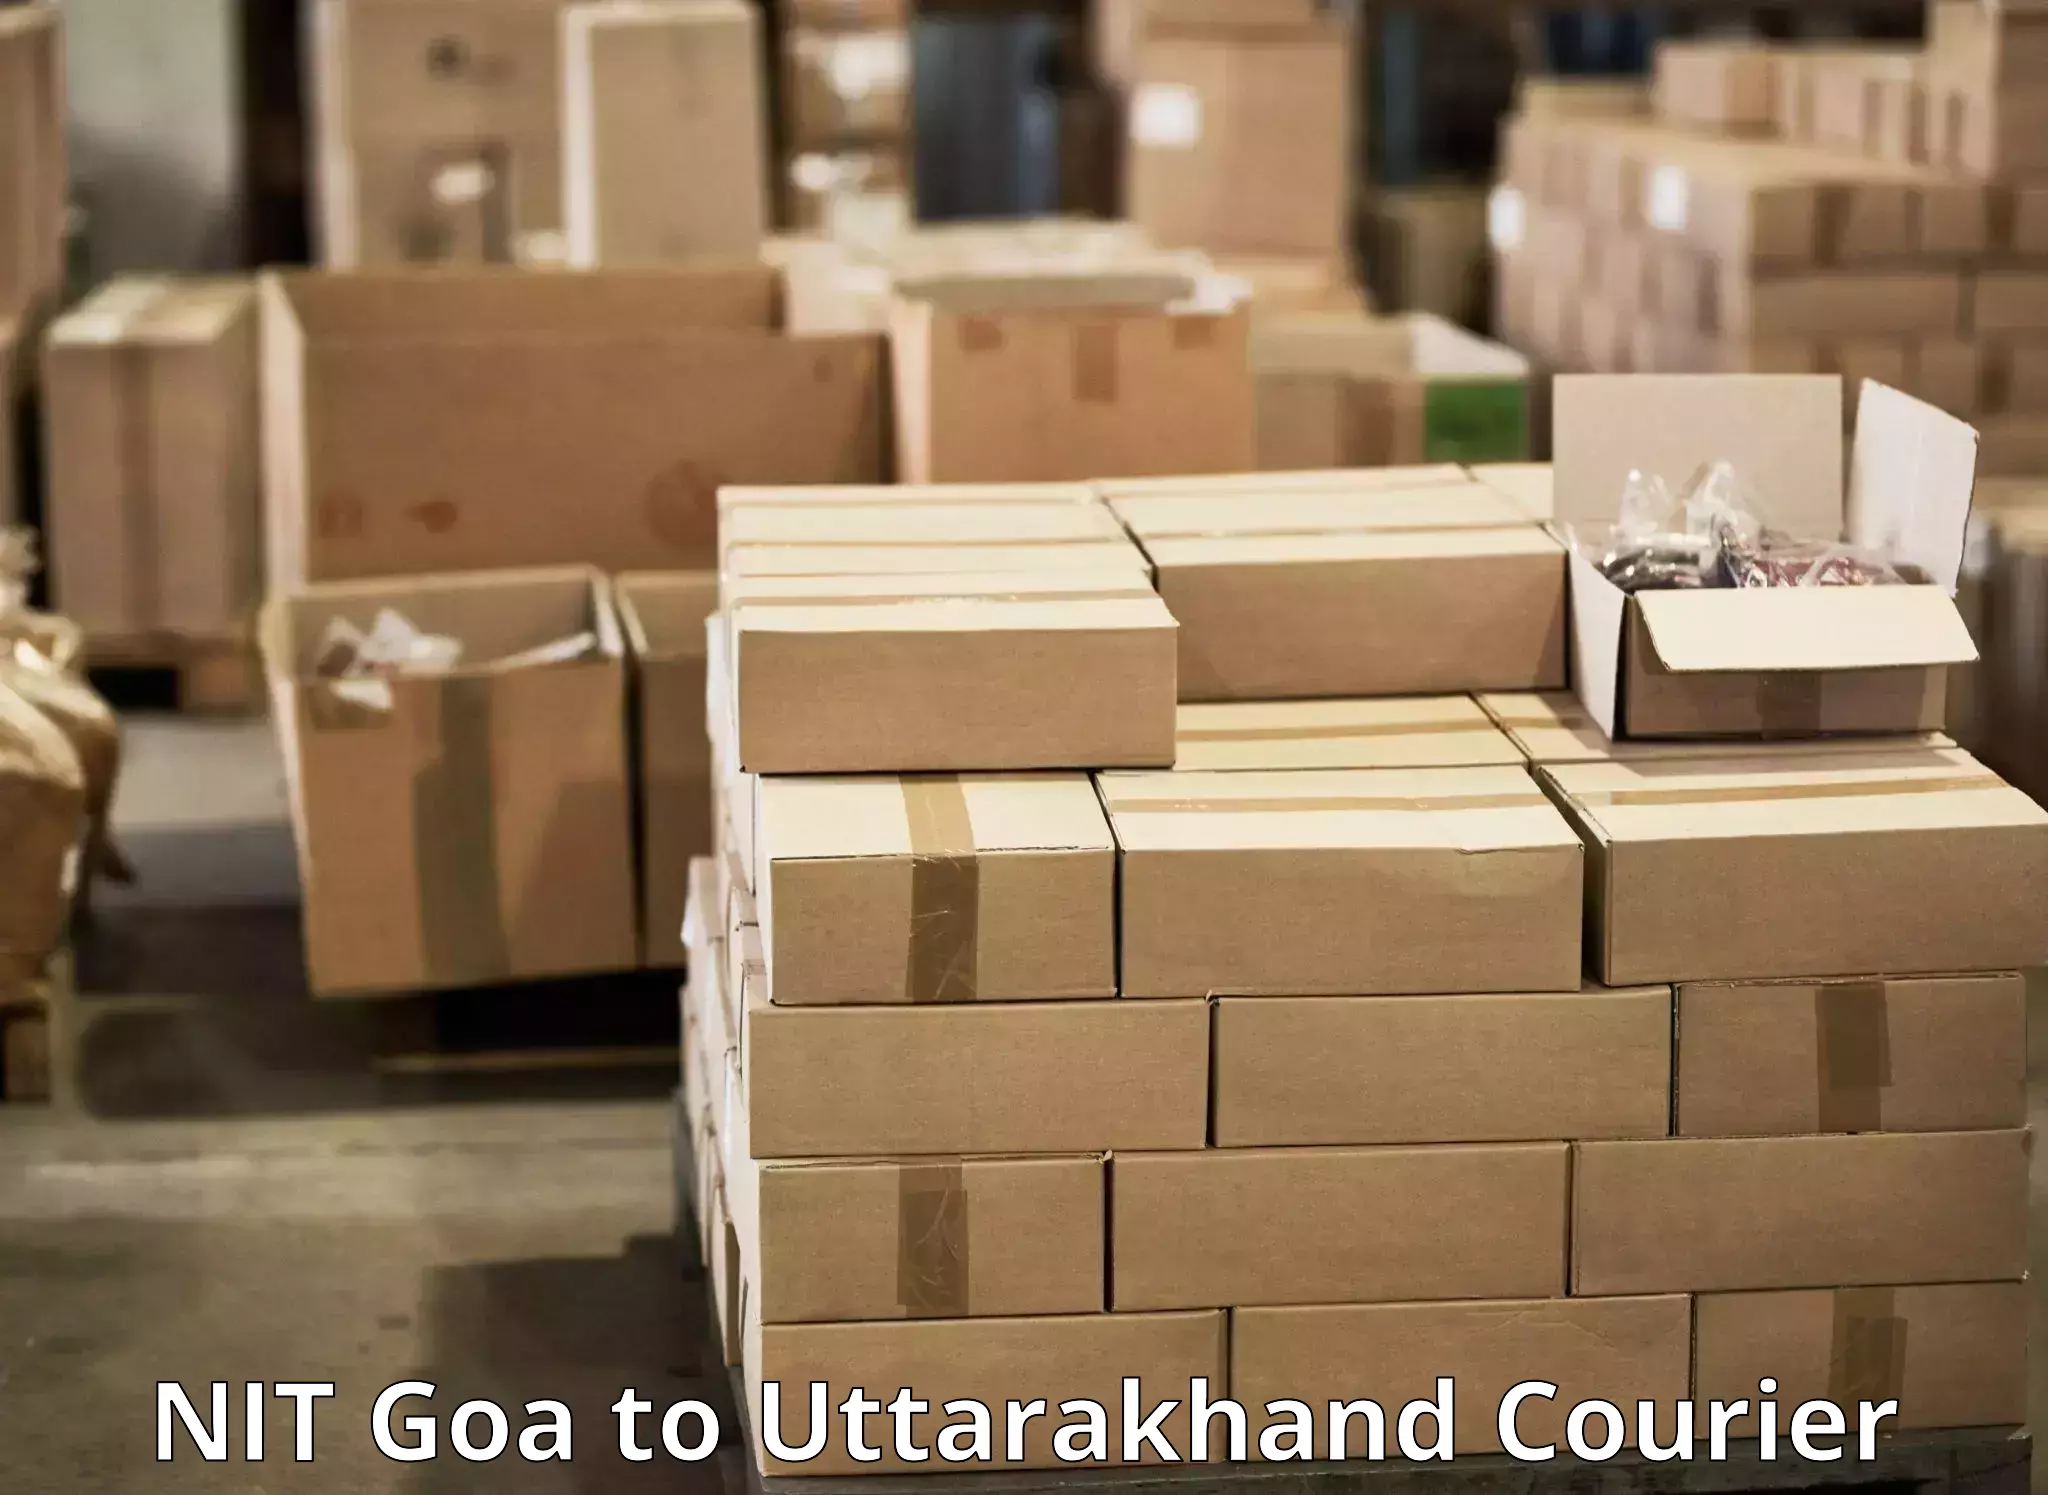 User-friendly courier app NIT Goa to Bageshwar